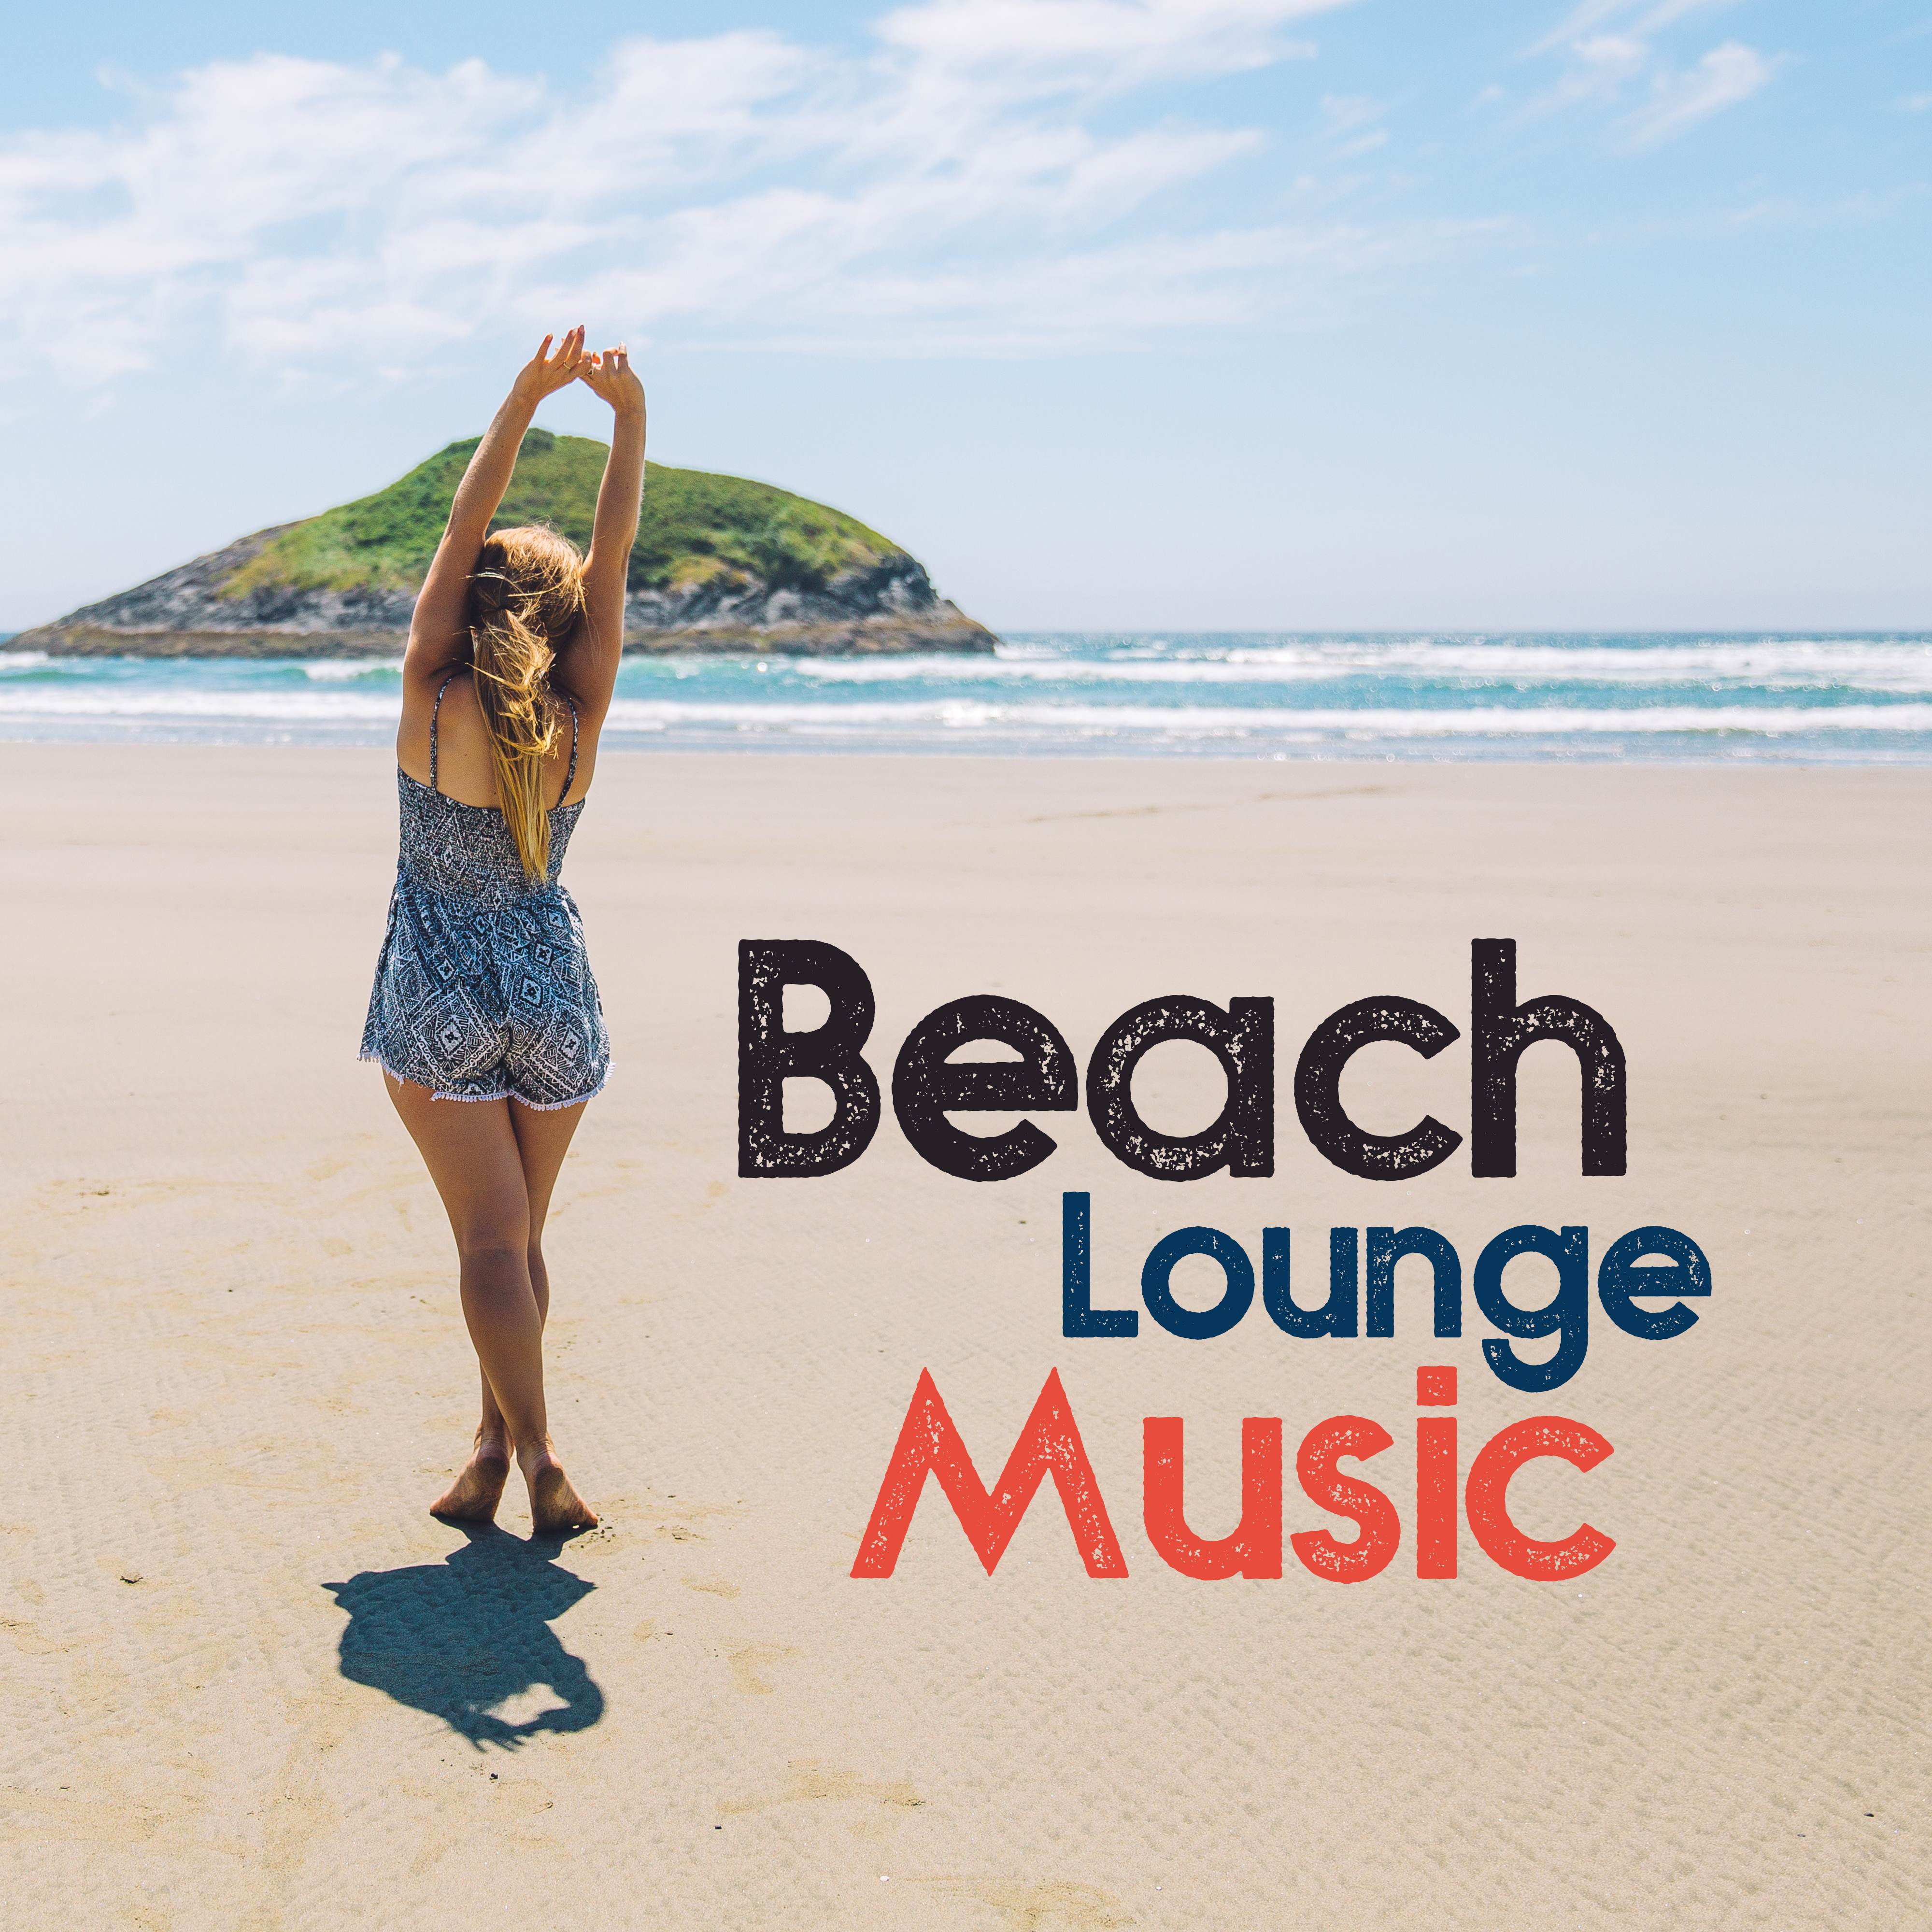 Beach Lounge Music – Sunset Beach Music, Sounds to Relax, Summer Vibes, Holiday 2017